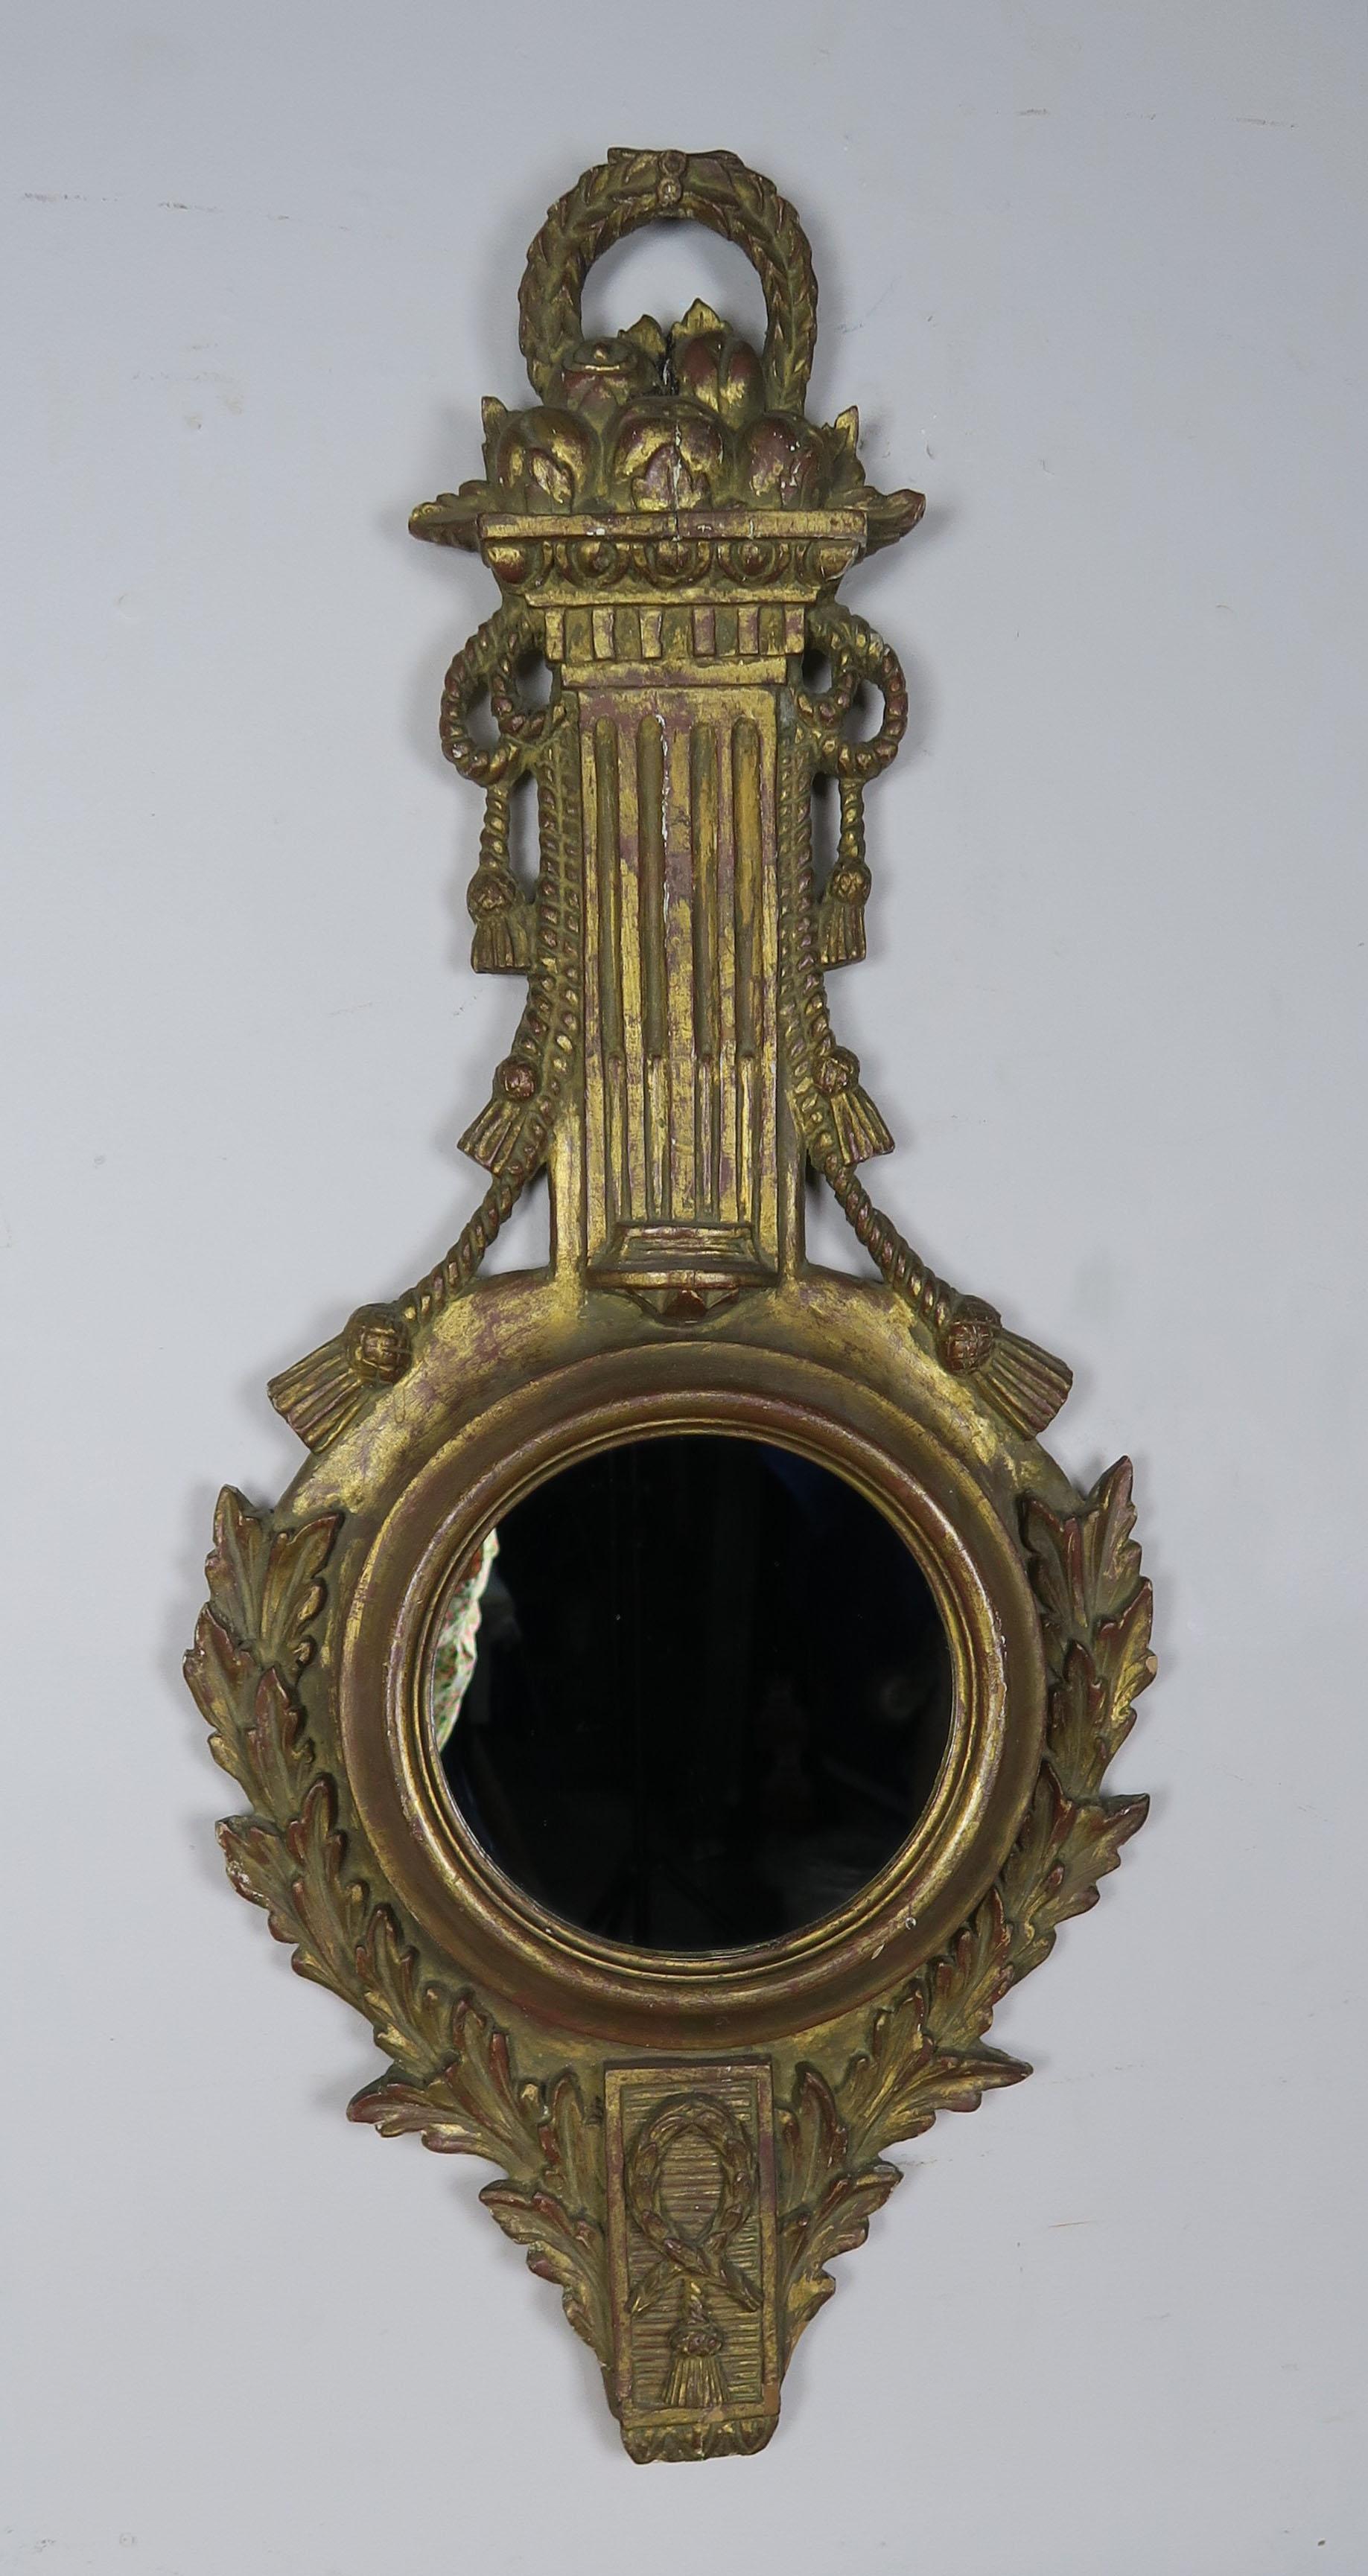 Italian giltwood mirror adorned with carved tassels and laurel leaves. Marked 